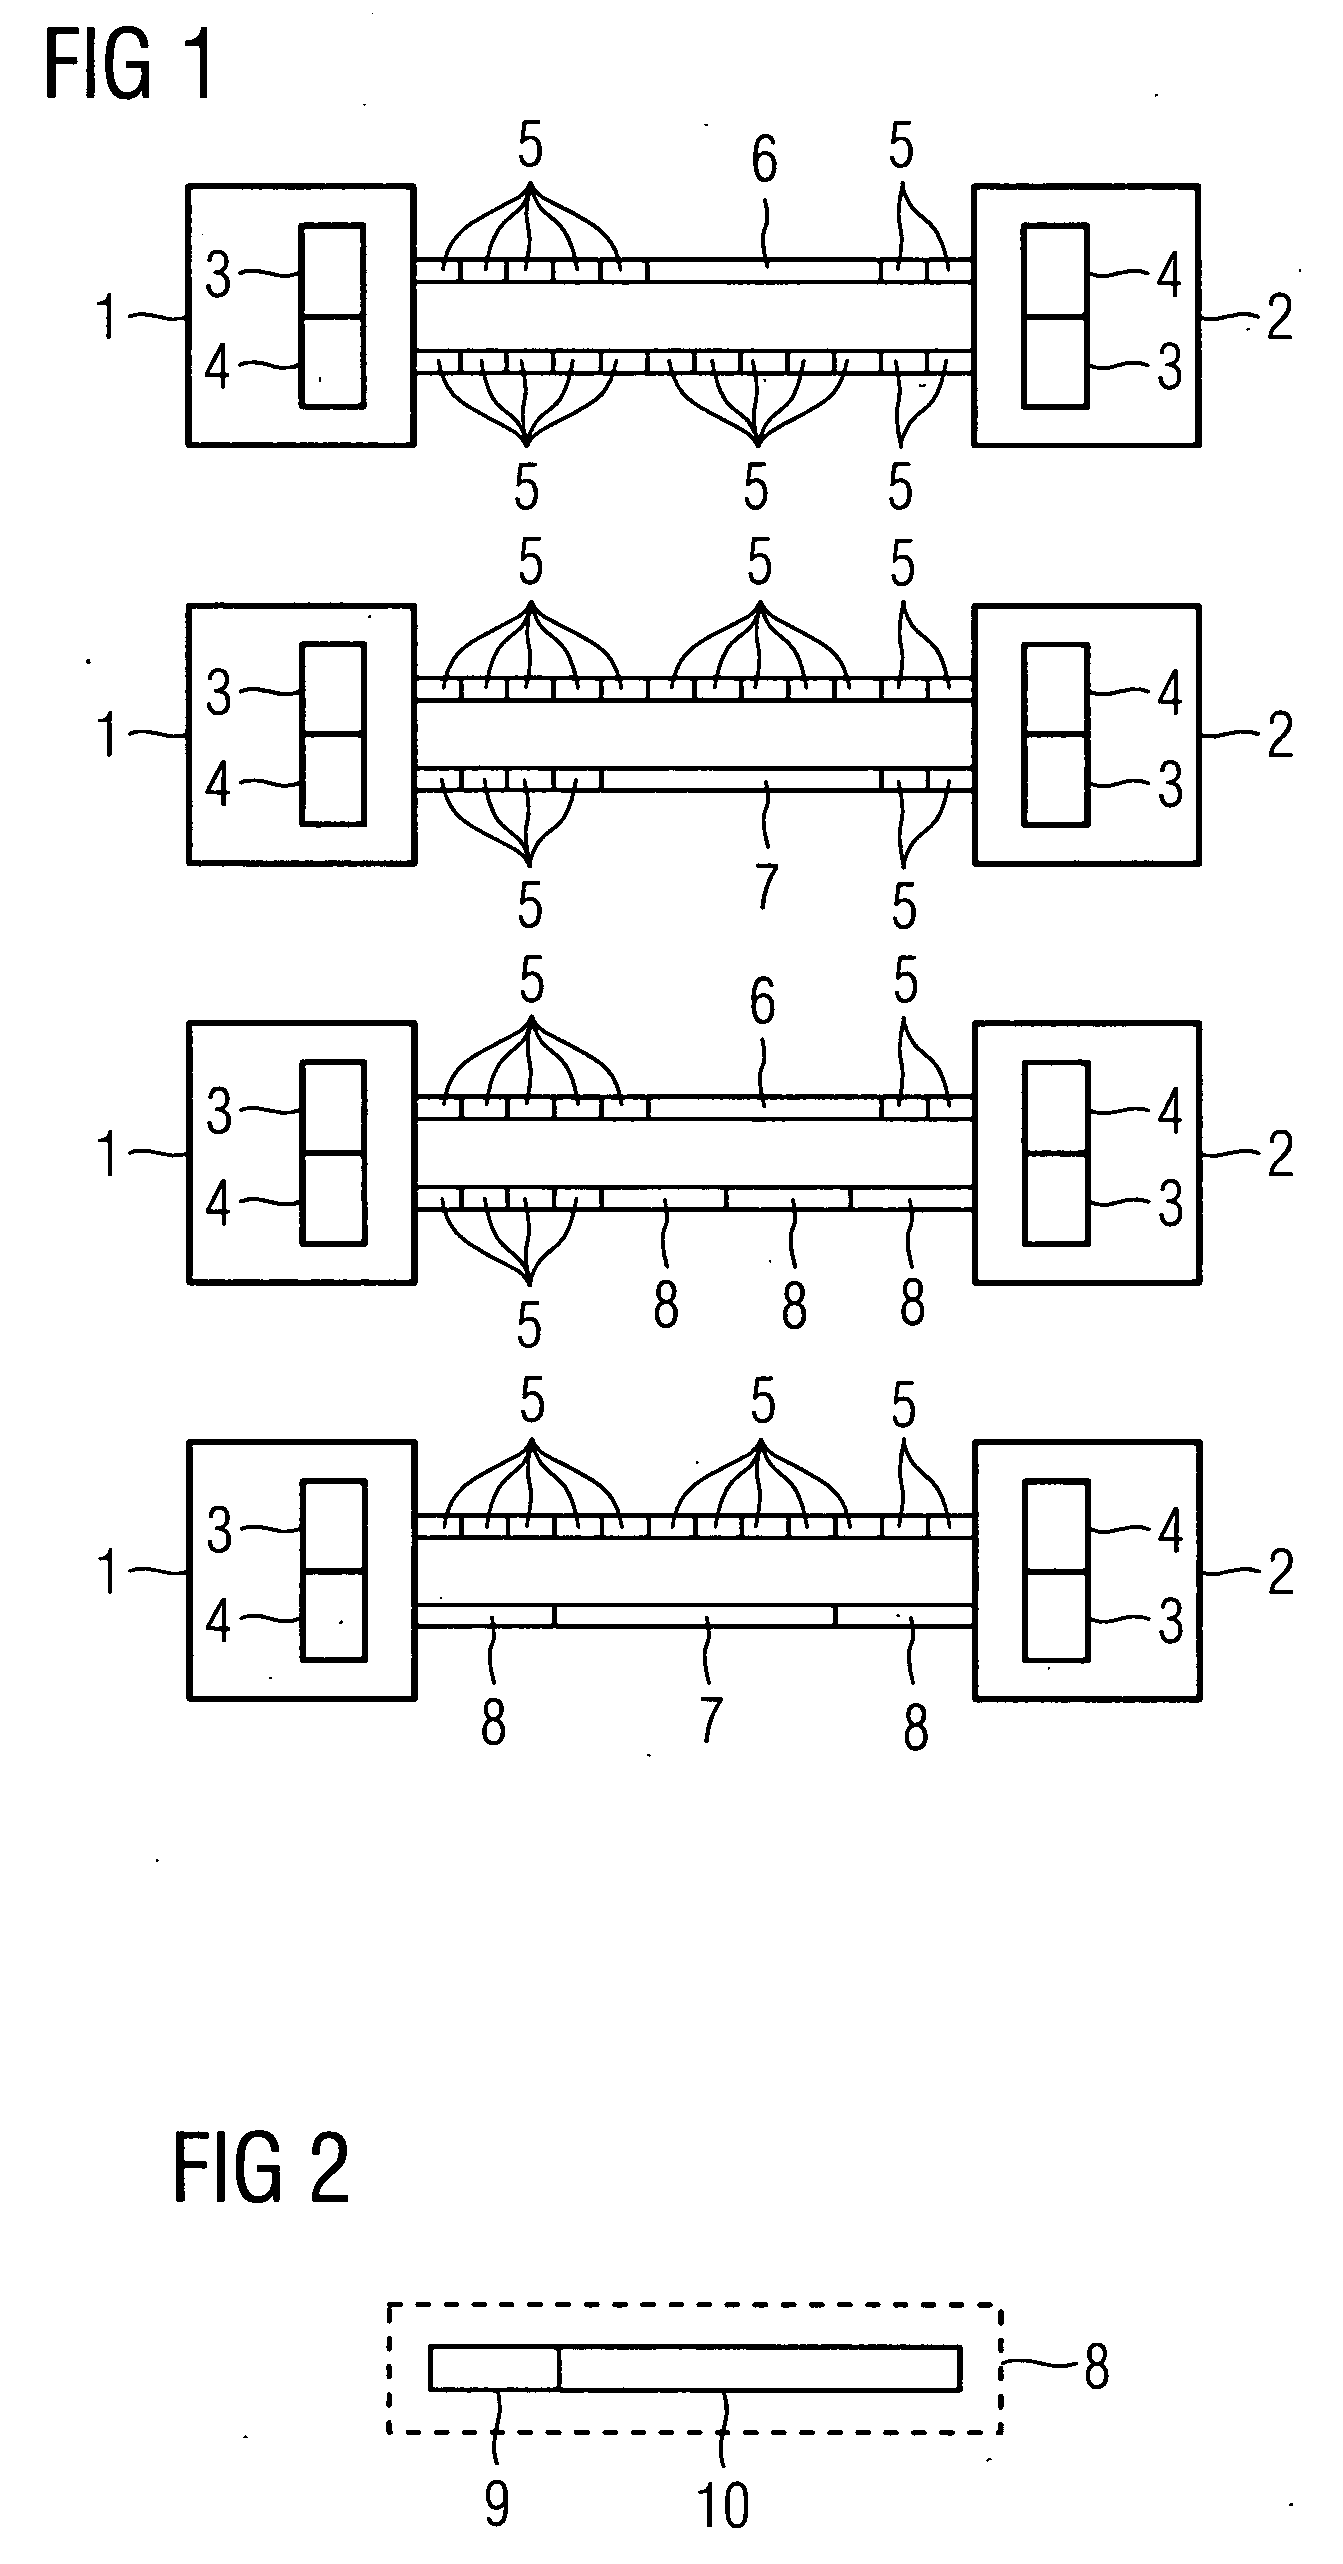 Event signaling between peripheral modules and a processing unit